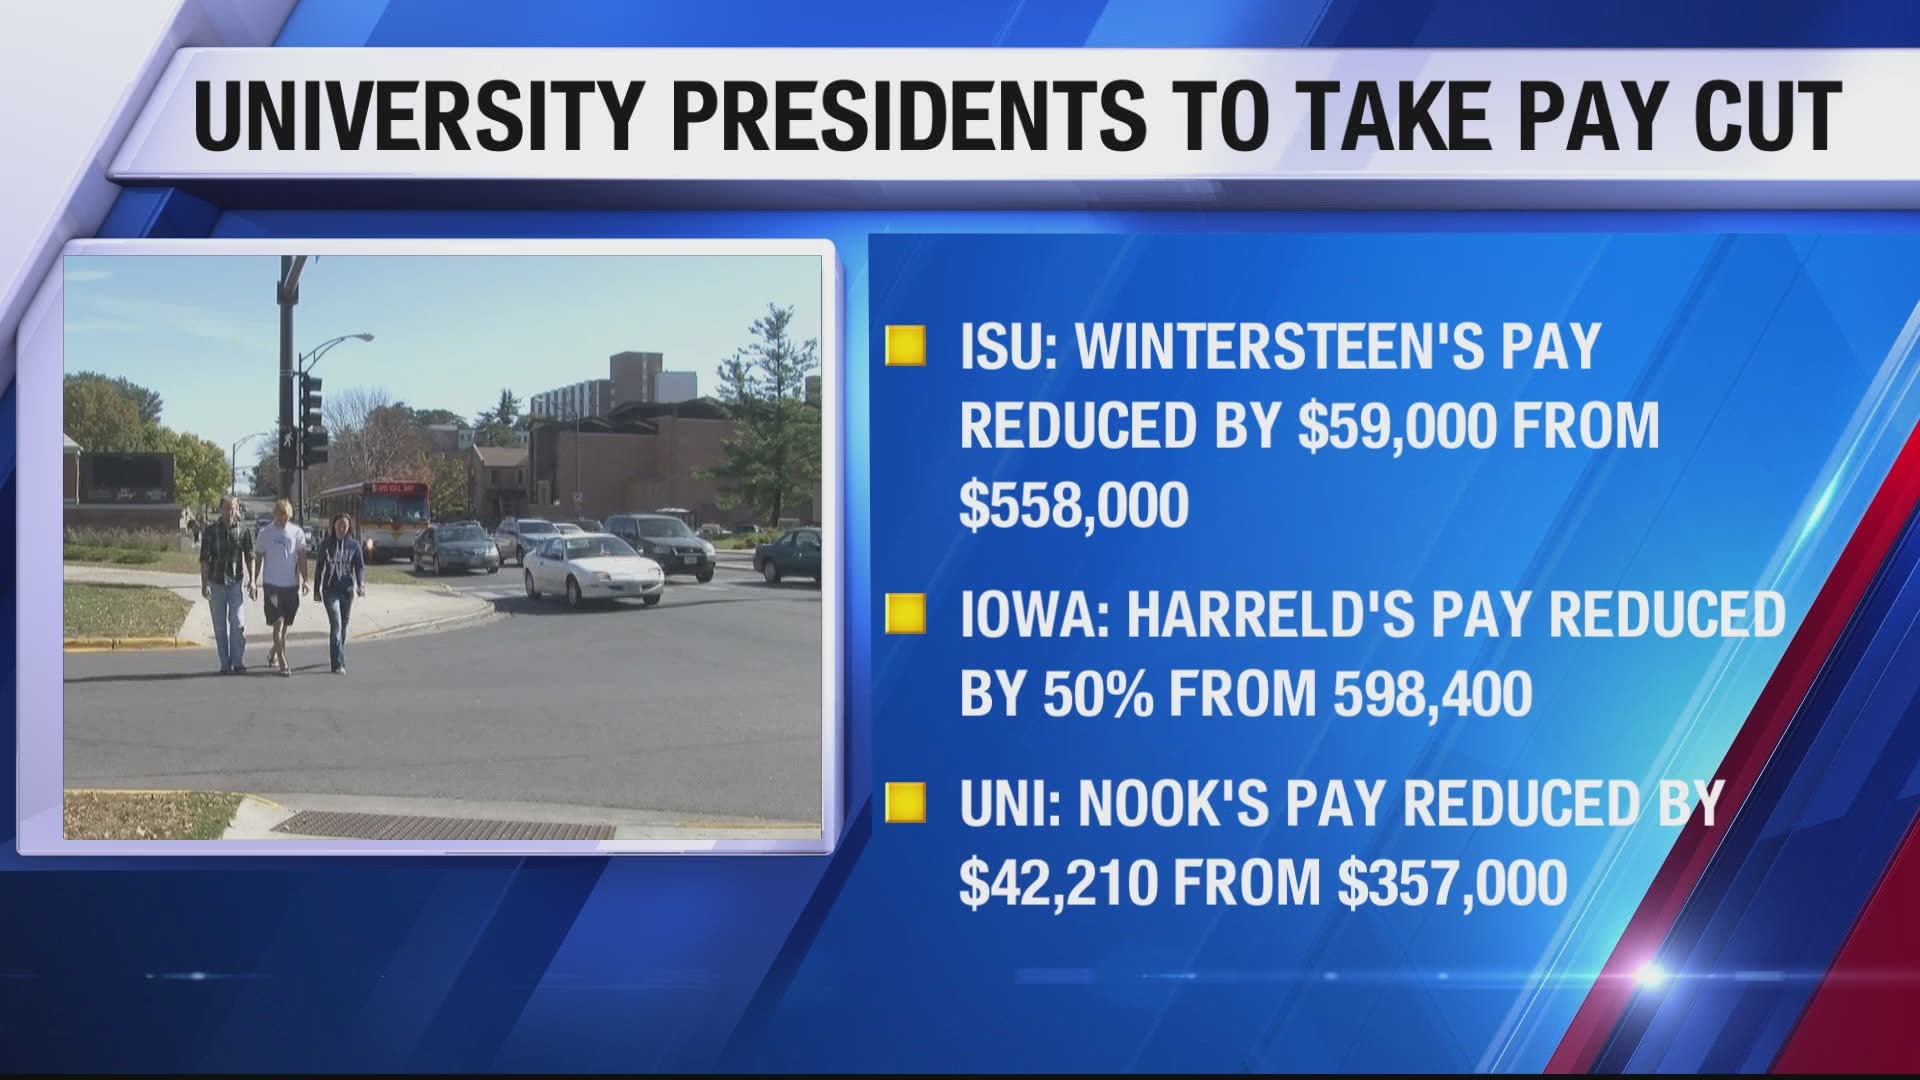 Salaries for the presidents of Iowa State University, University of Iowa and University of Iowa were reduced by up to 50%.